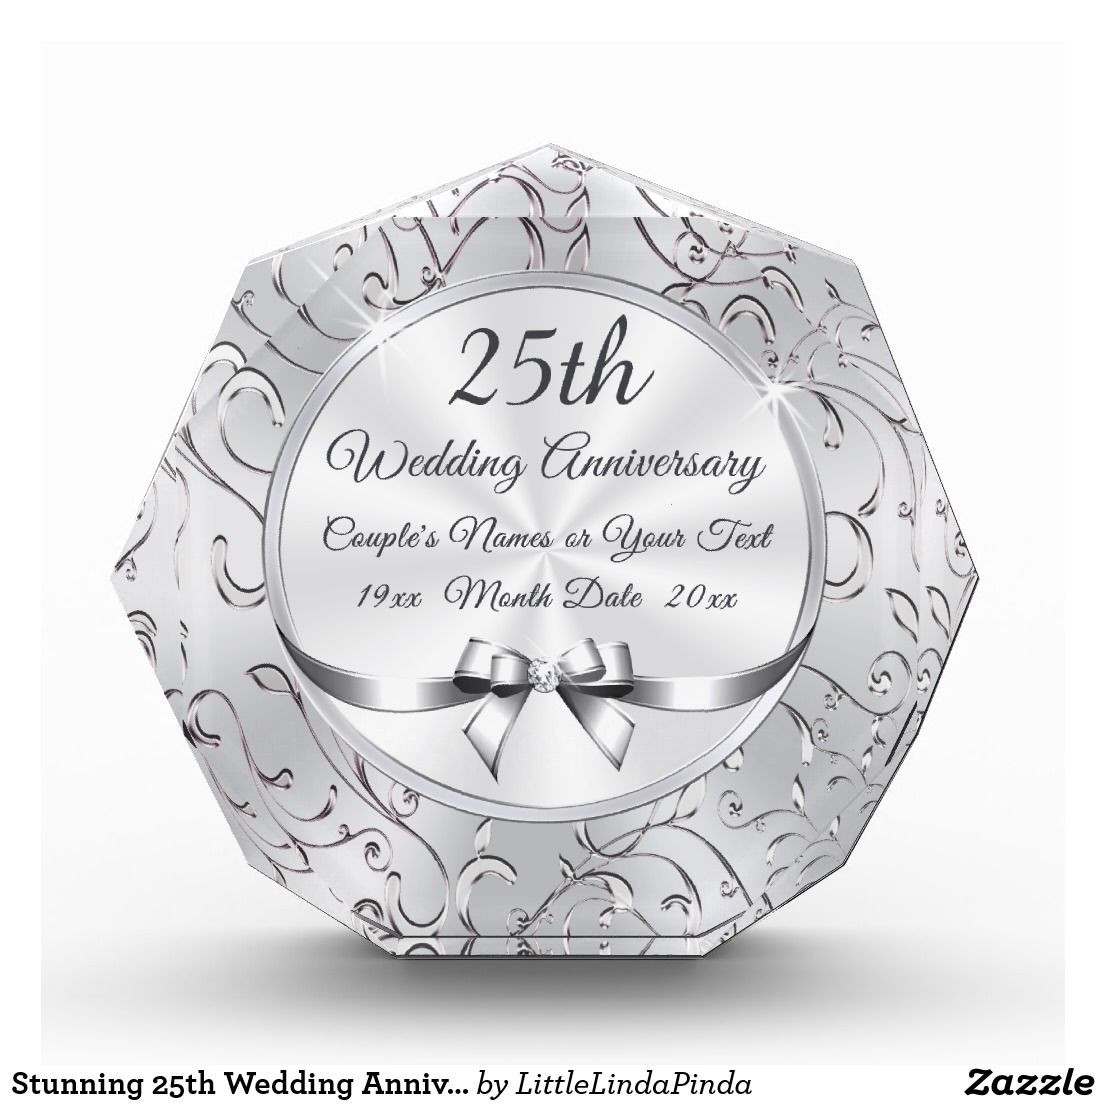 25Th Wedding Anniversary Gift Ideas For Couples
 Stunning 25th Wedding Anniversary Gift Ideas